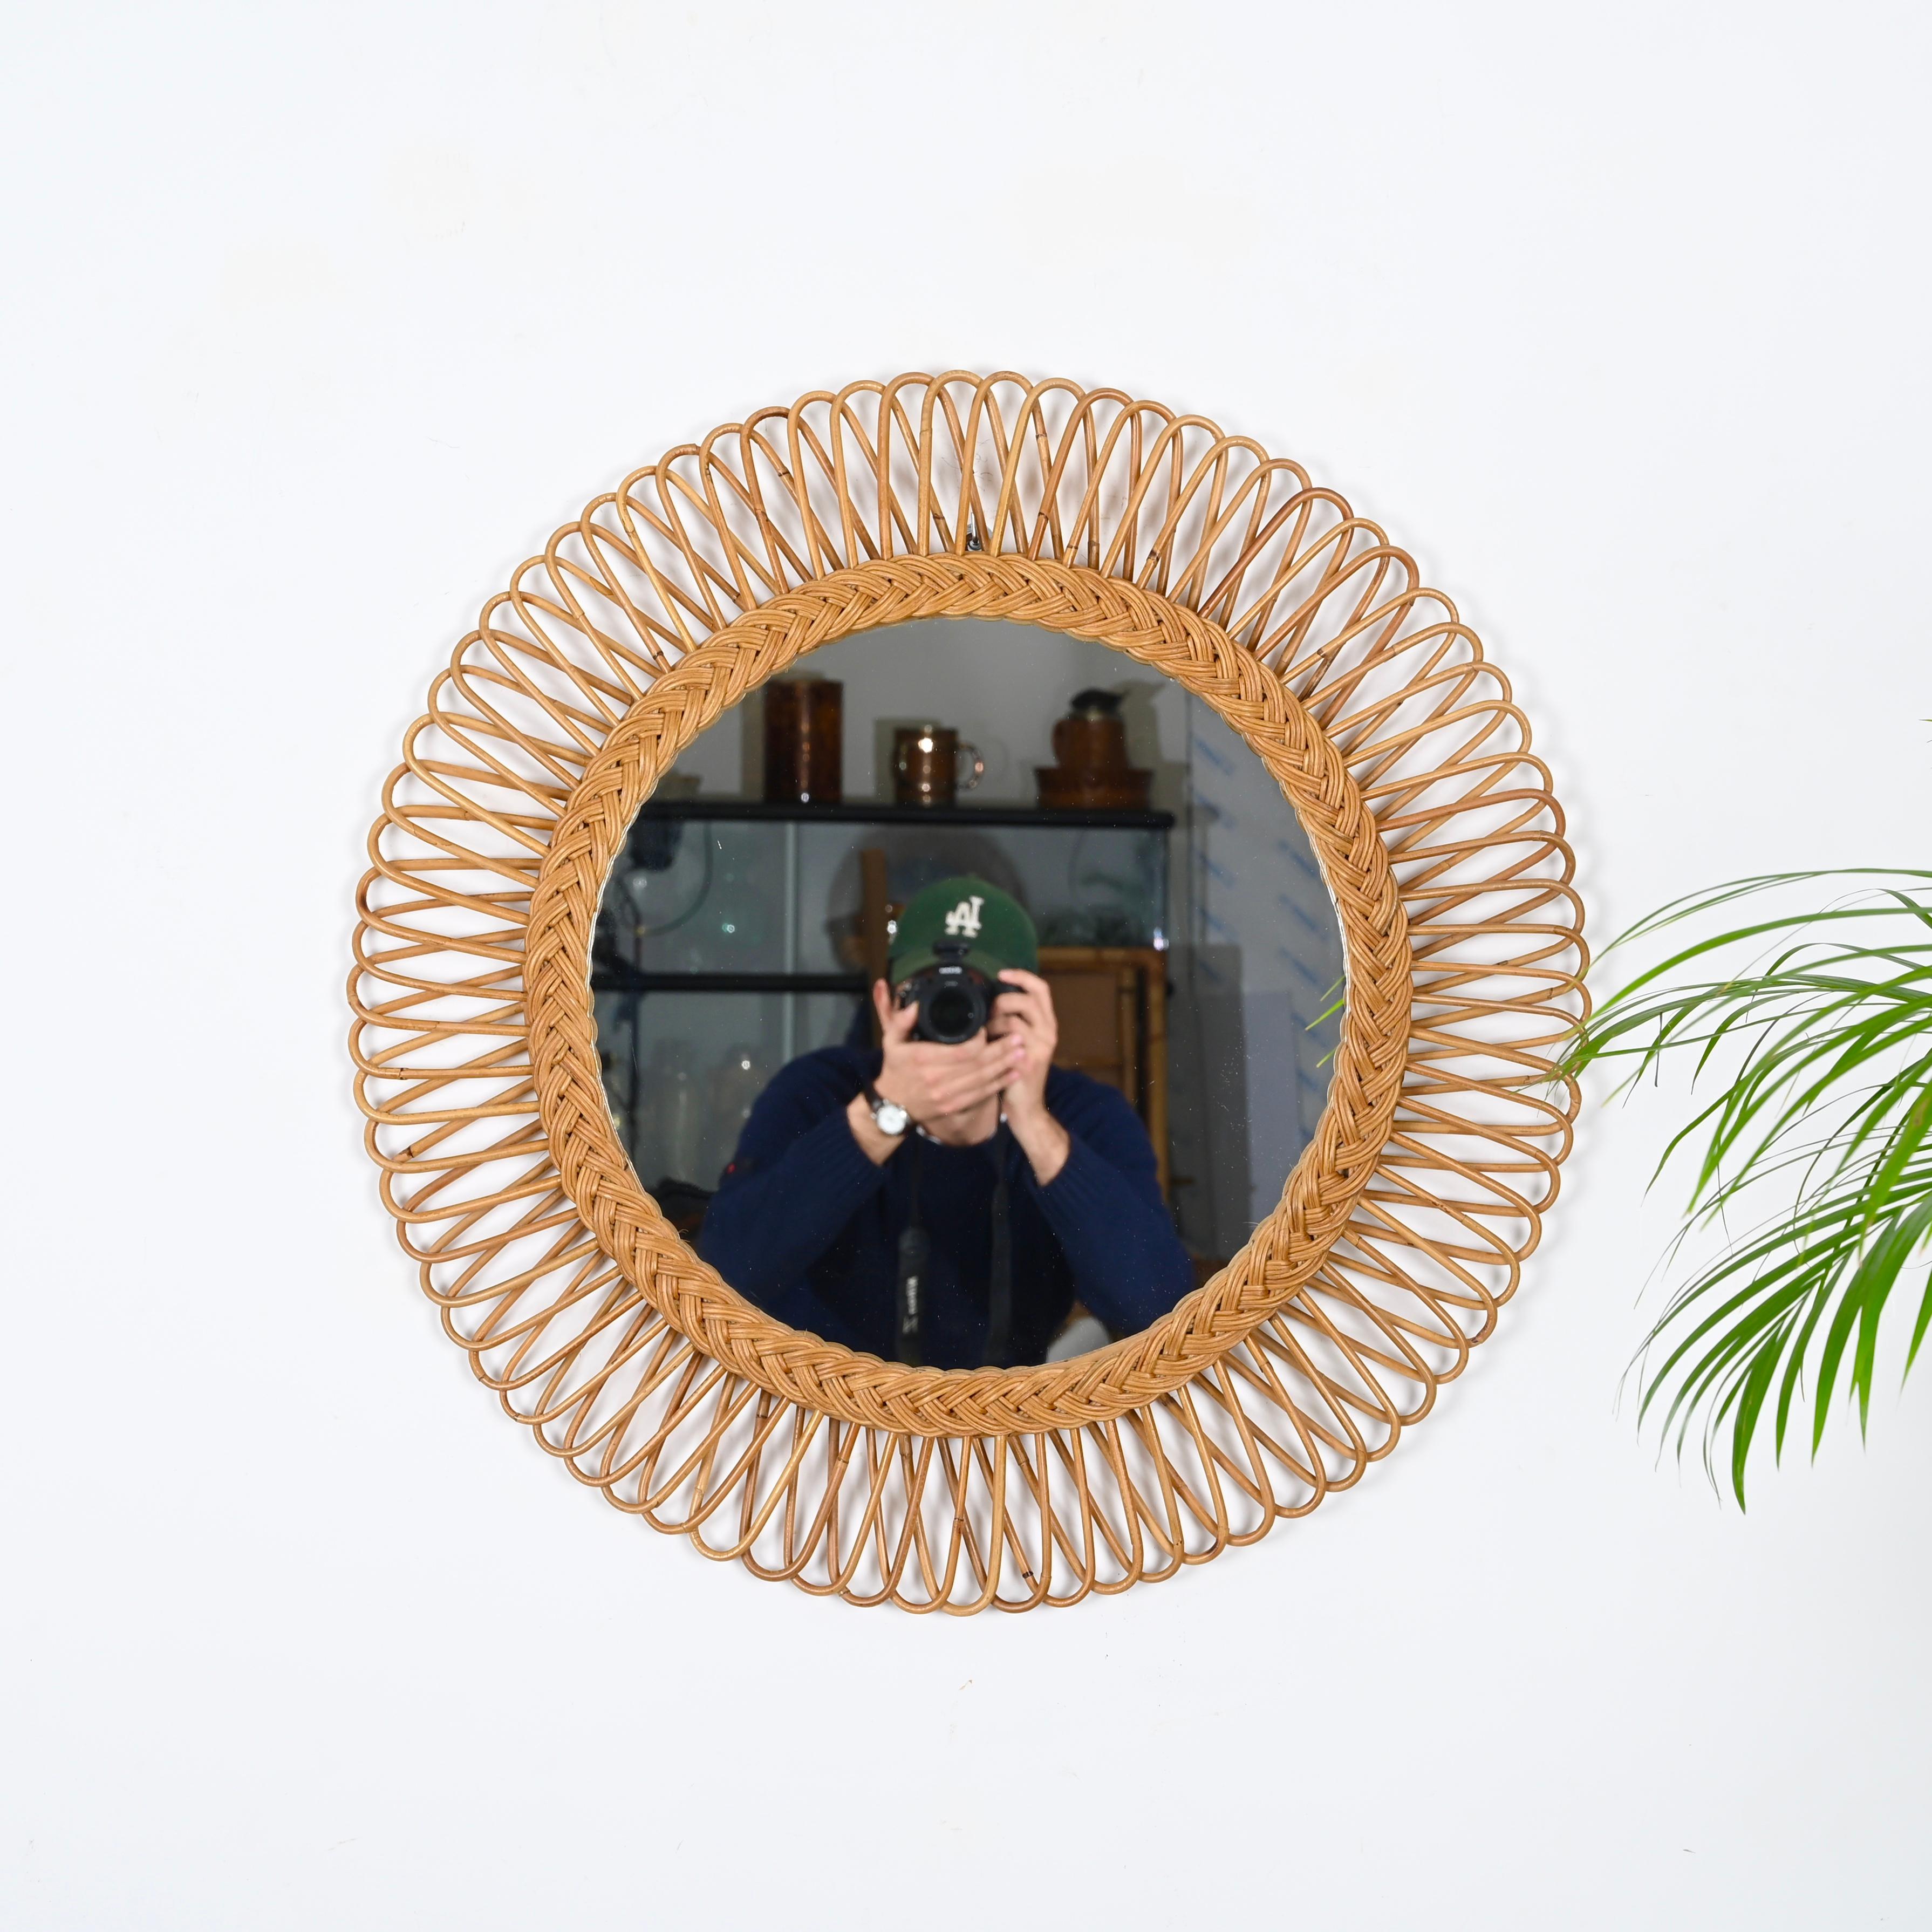 Marvelous mid-century French Riviera style round mirror in Rattan and Bamboo. This beautiful piece was produced in in Italy during the 1970s and is attributed to the mastery of Franco Albini. 

This stunning mirror has a double frame, decorated by